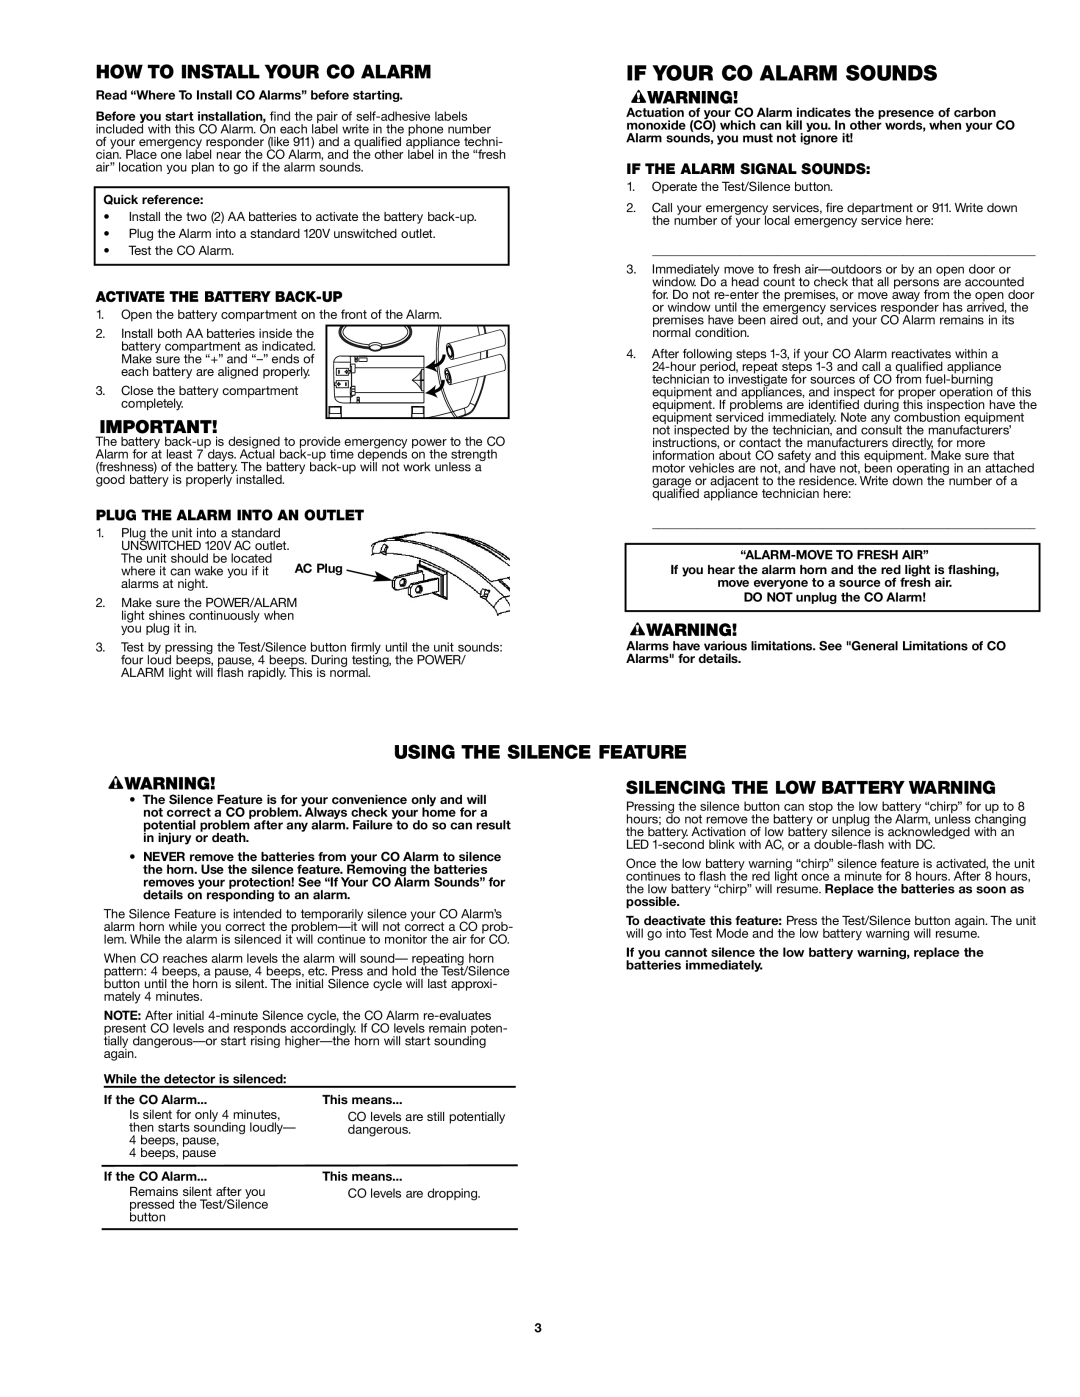 First Alert CO605 user manual If Your Co Alarm Sounds, How To Install Your Co Alarm, Using The Silence Feature 